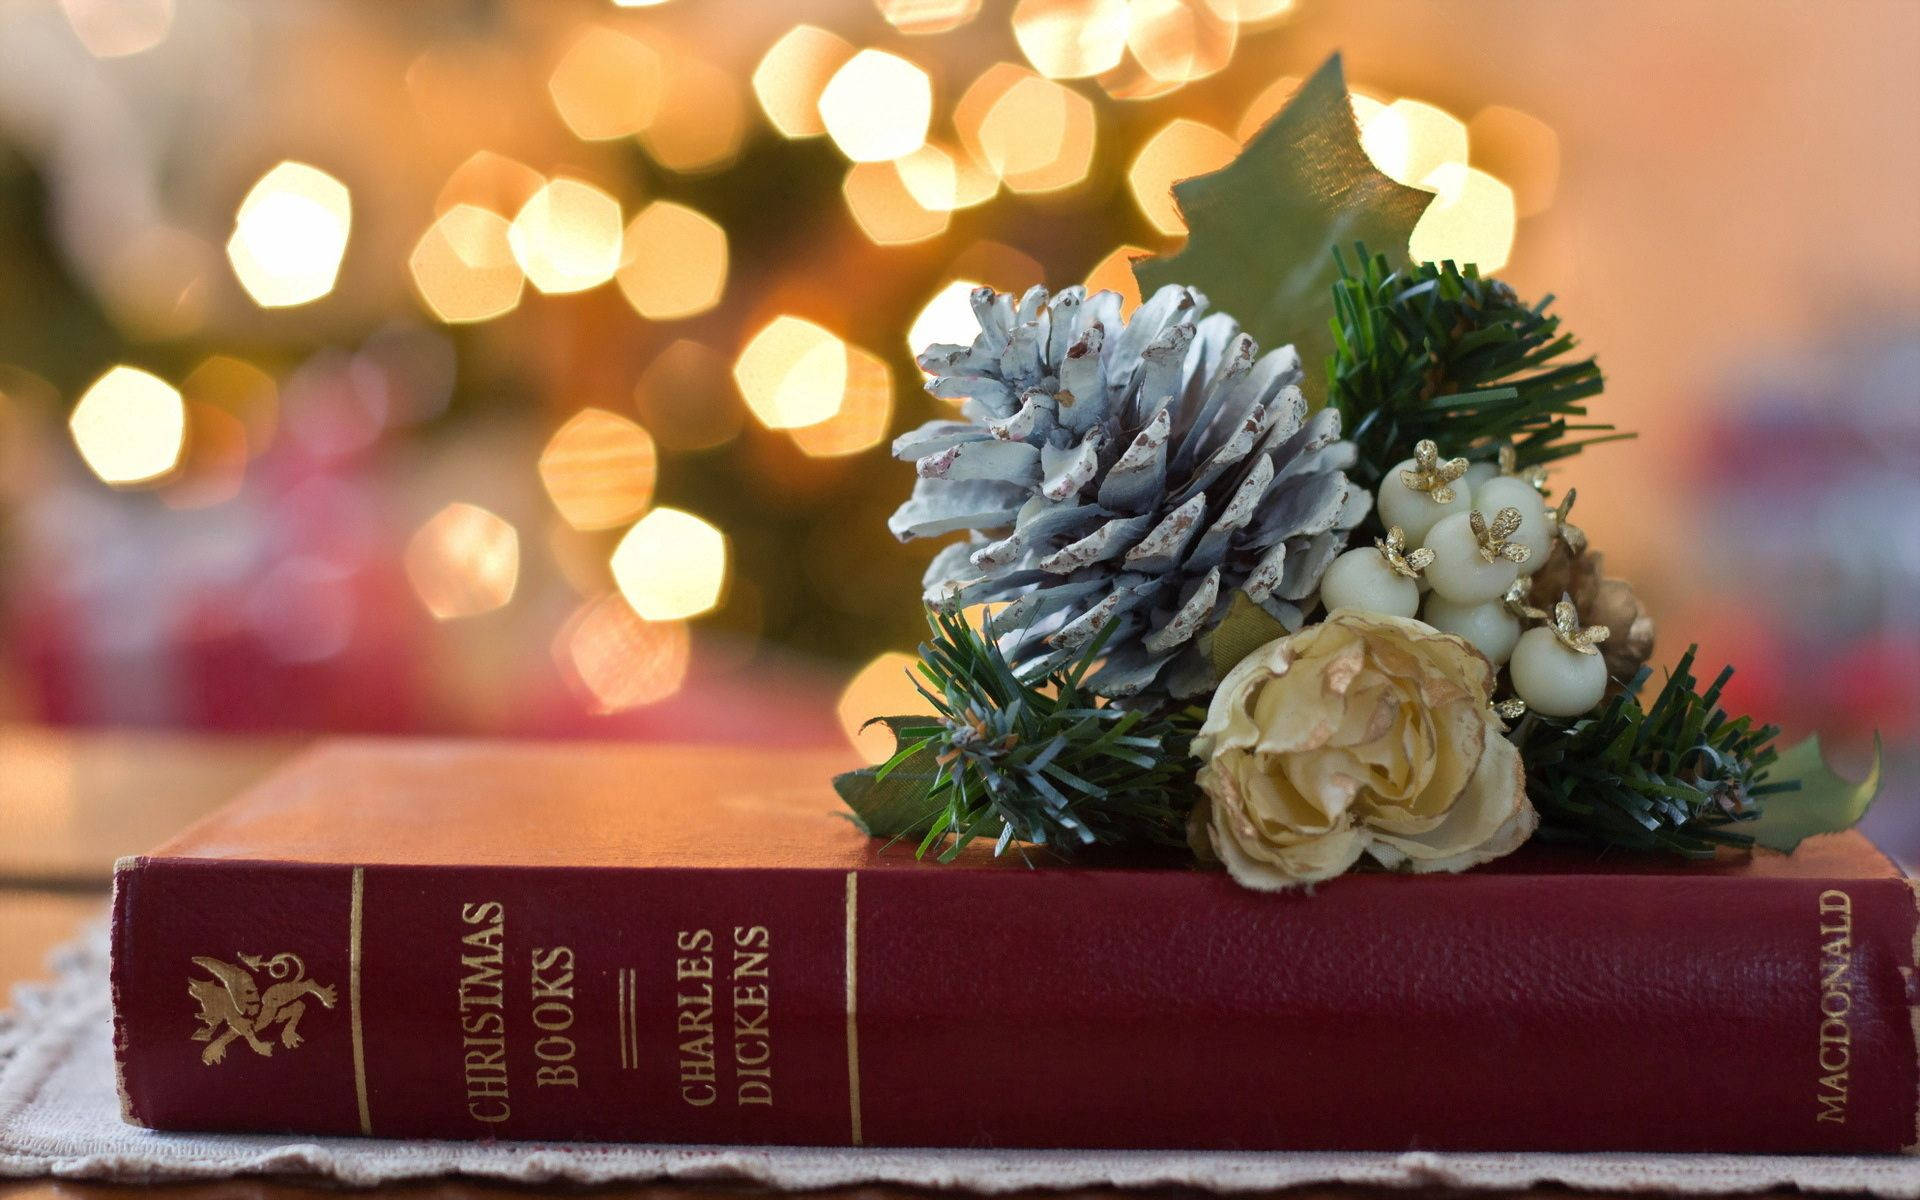 Book and the holiday spirit wallpaper